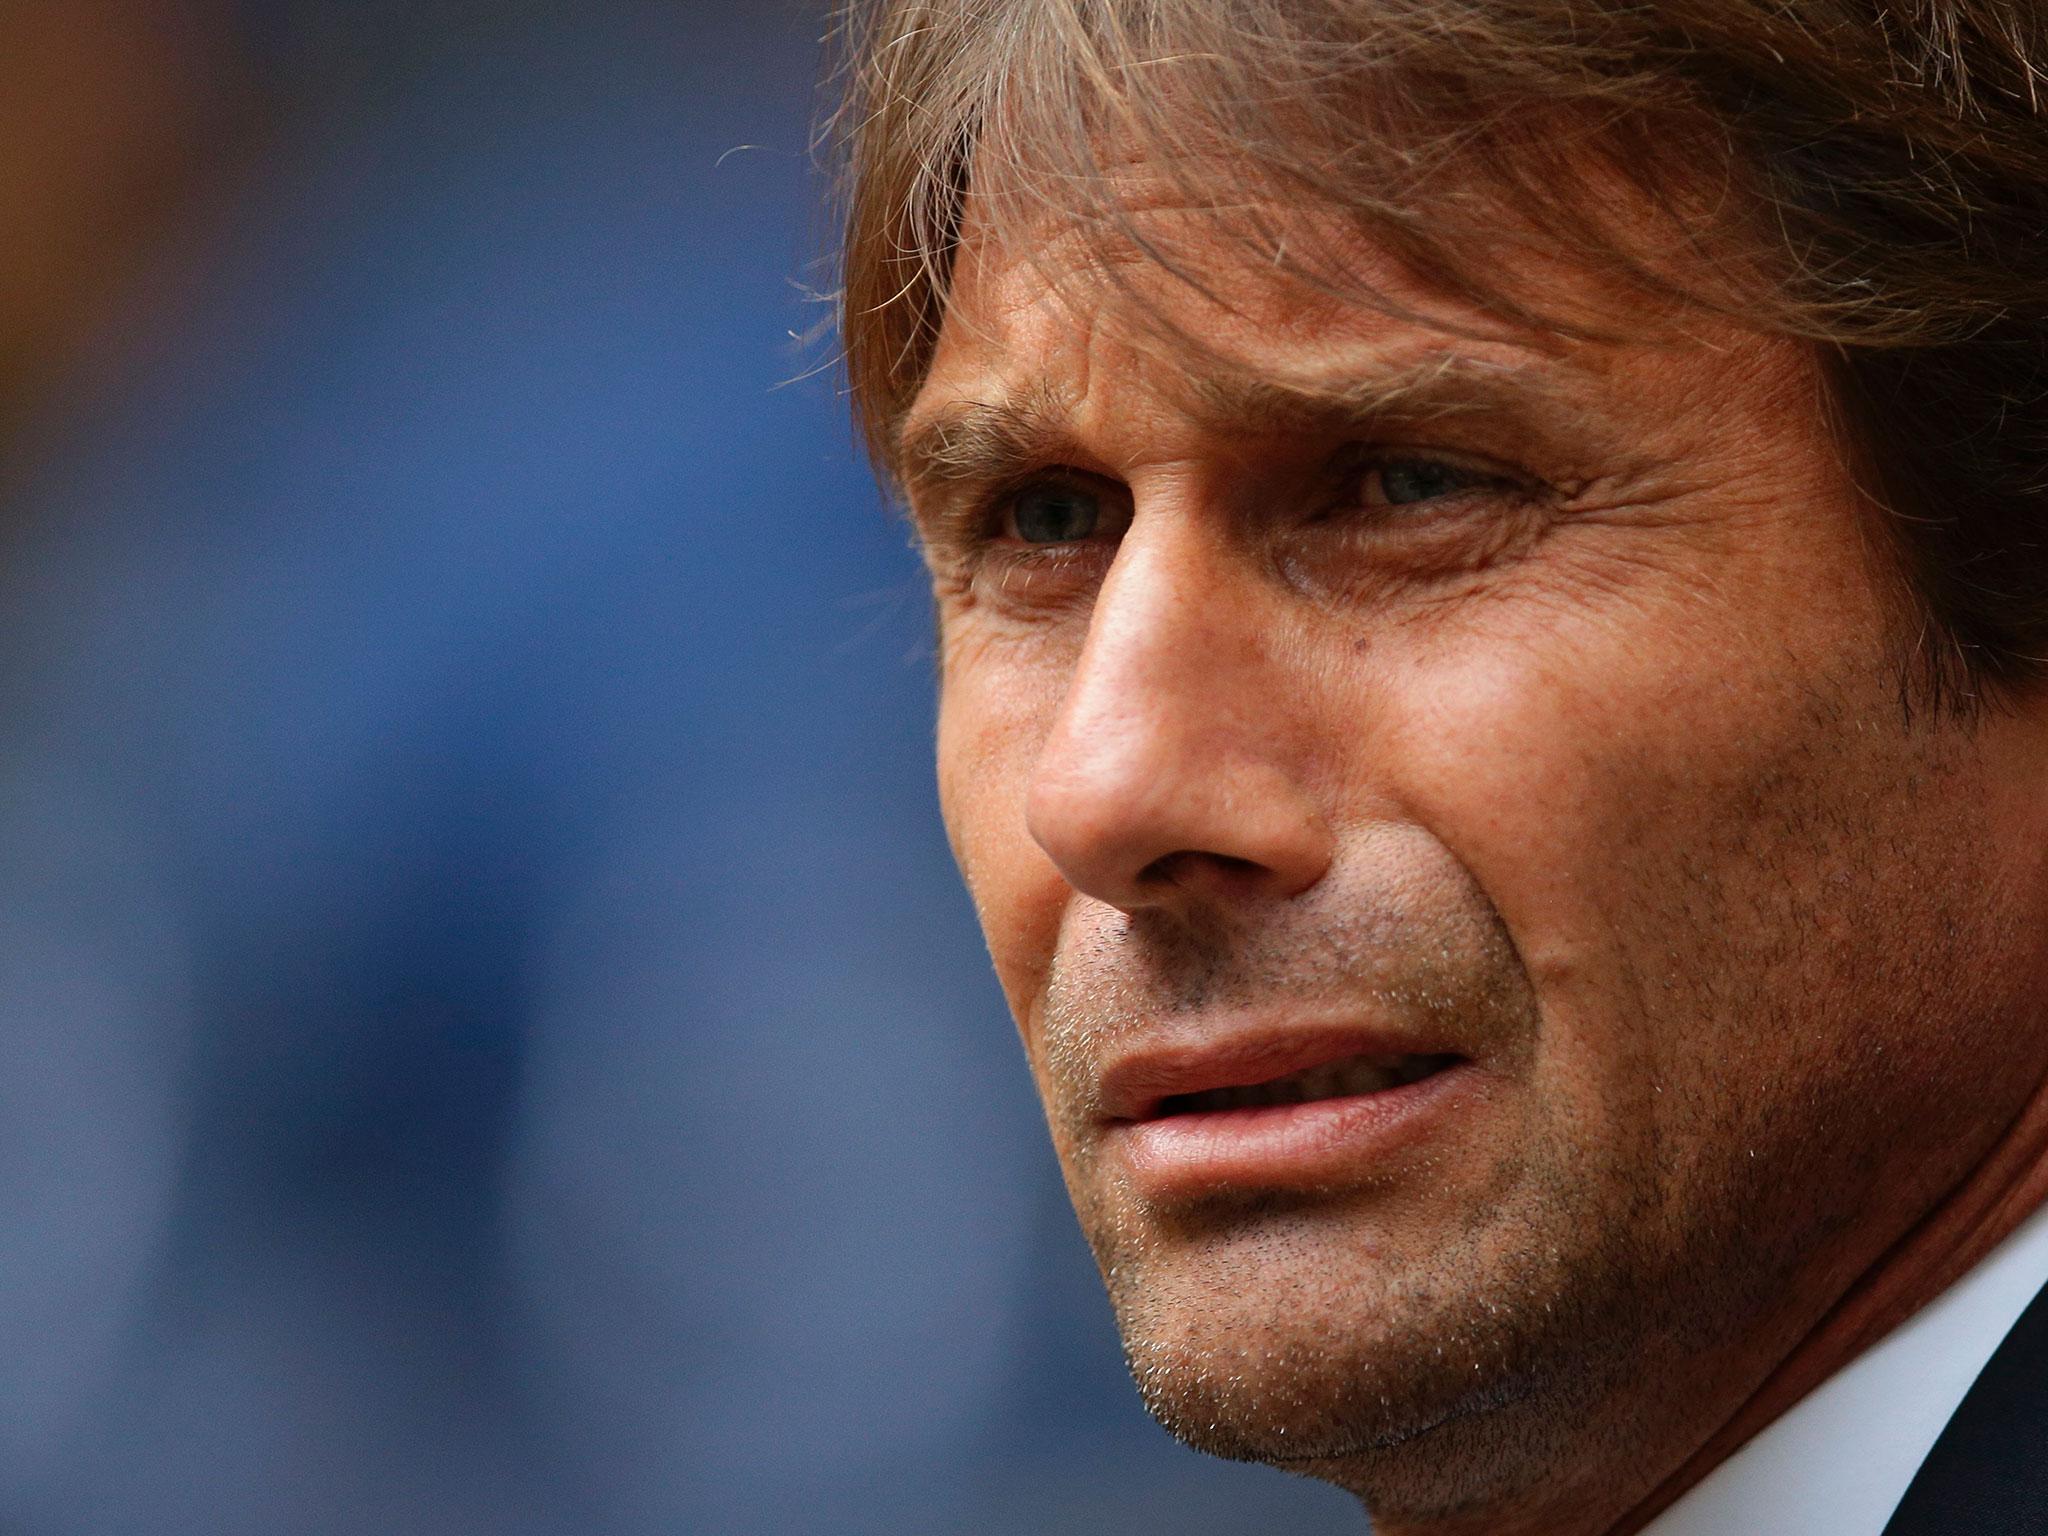 Chelsea have denied reports they are set to replace Antonio Conte